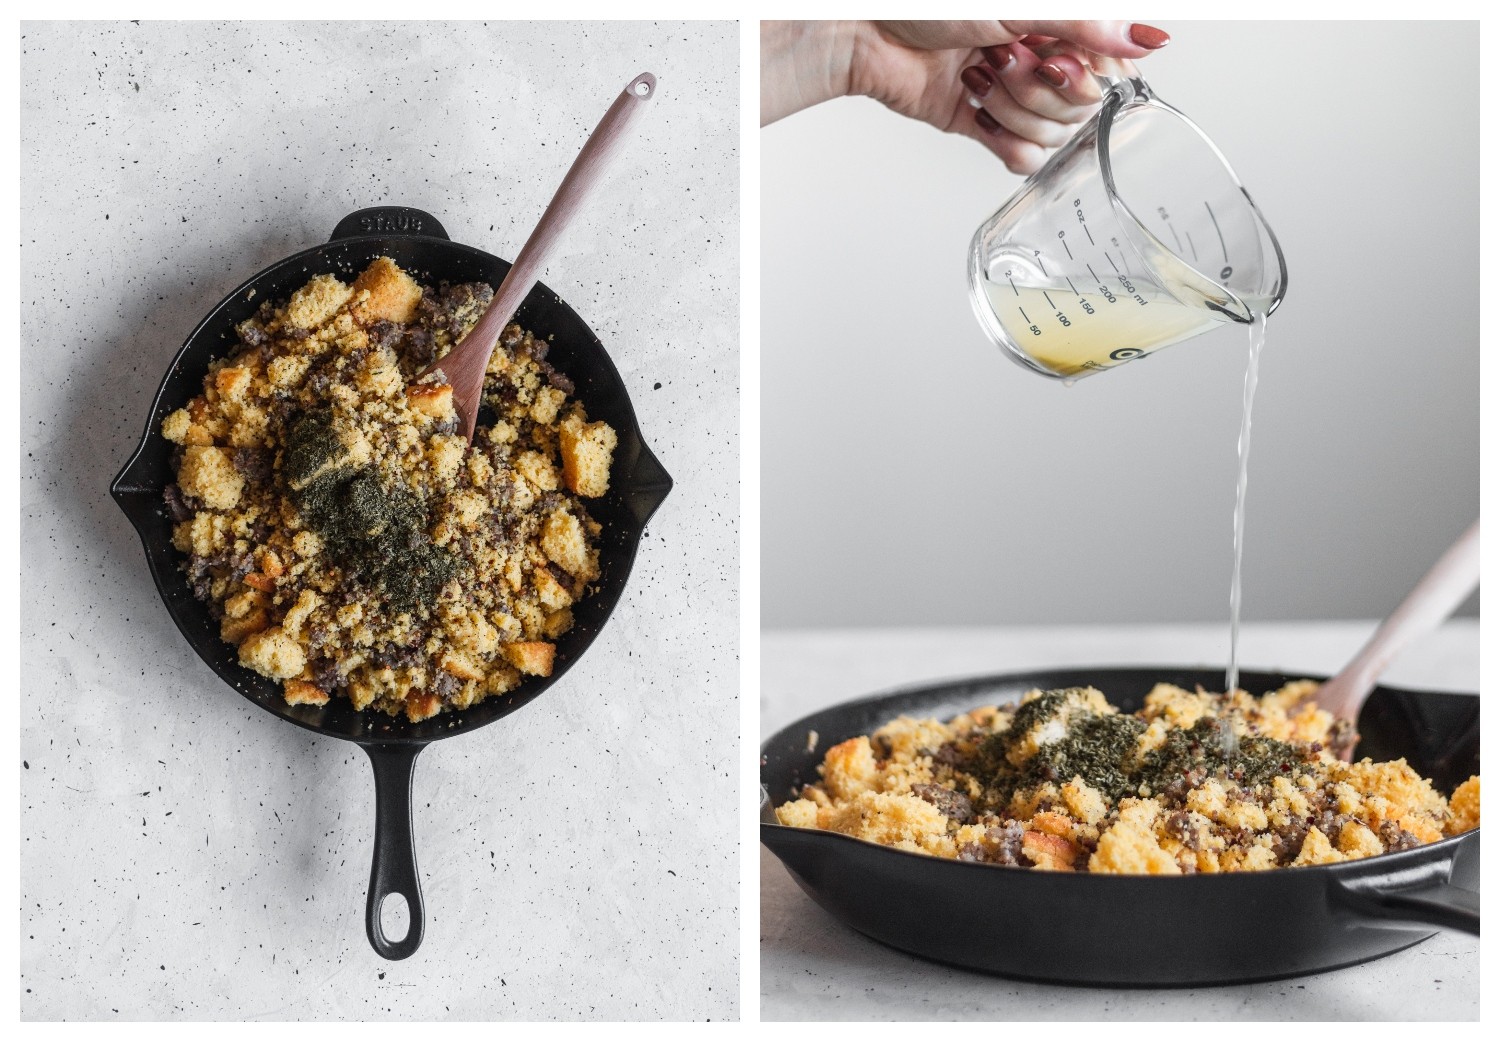 Two images; the image on the left is an overhead photo of a black Staub pan on a grey table filled with Thanksgiving dressing. On the right, a woman's hand is pouring chicken broth into the dressing.